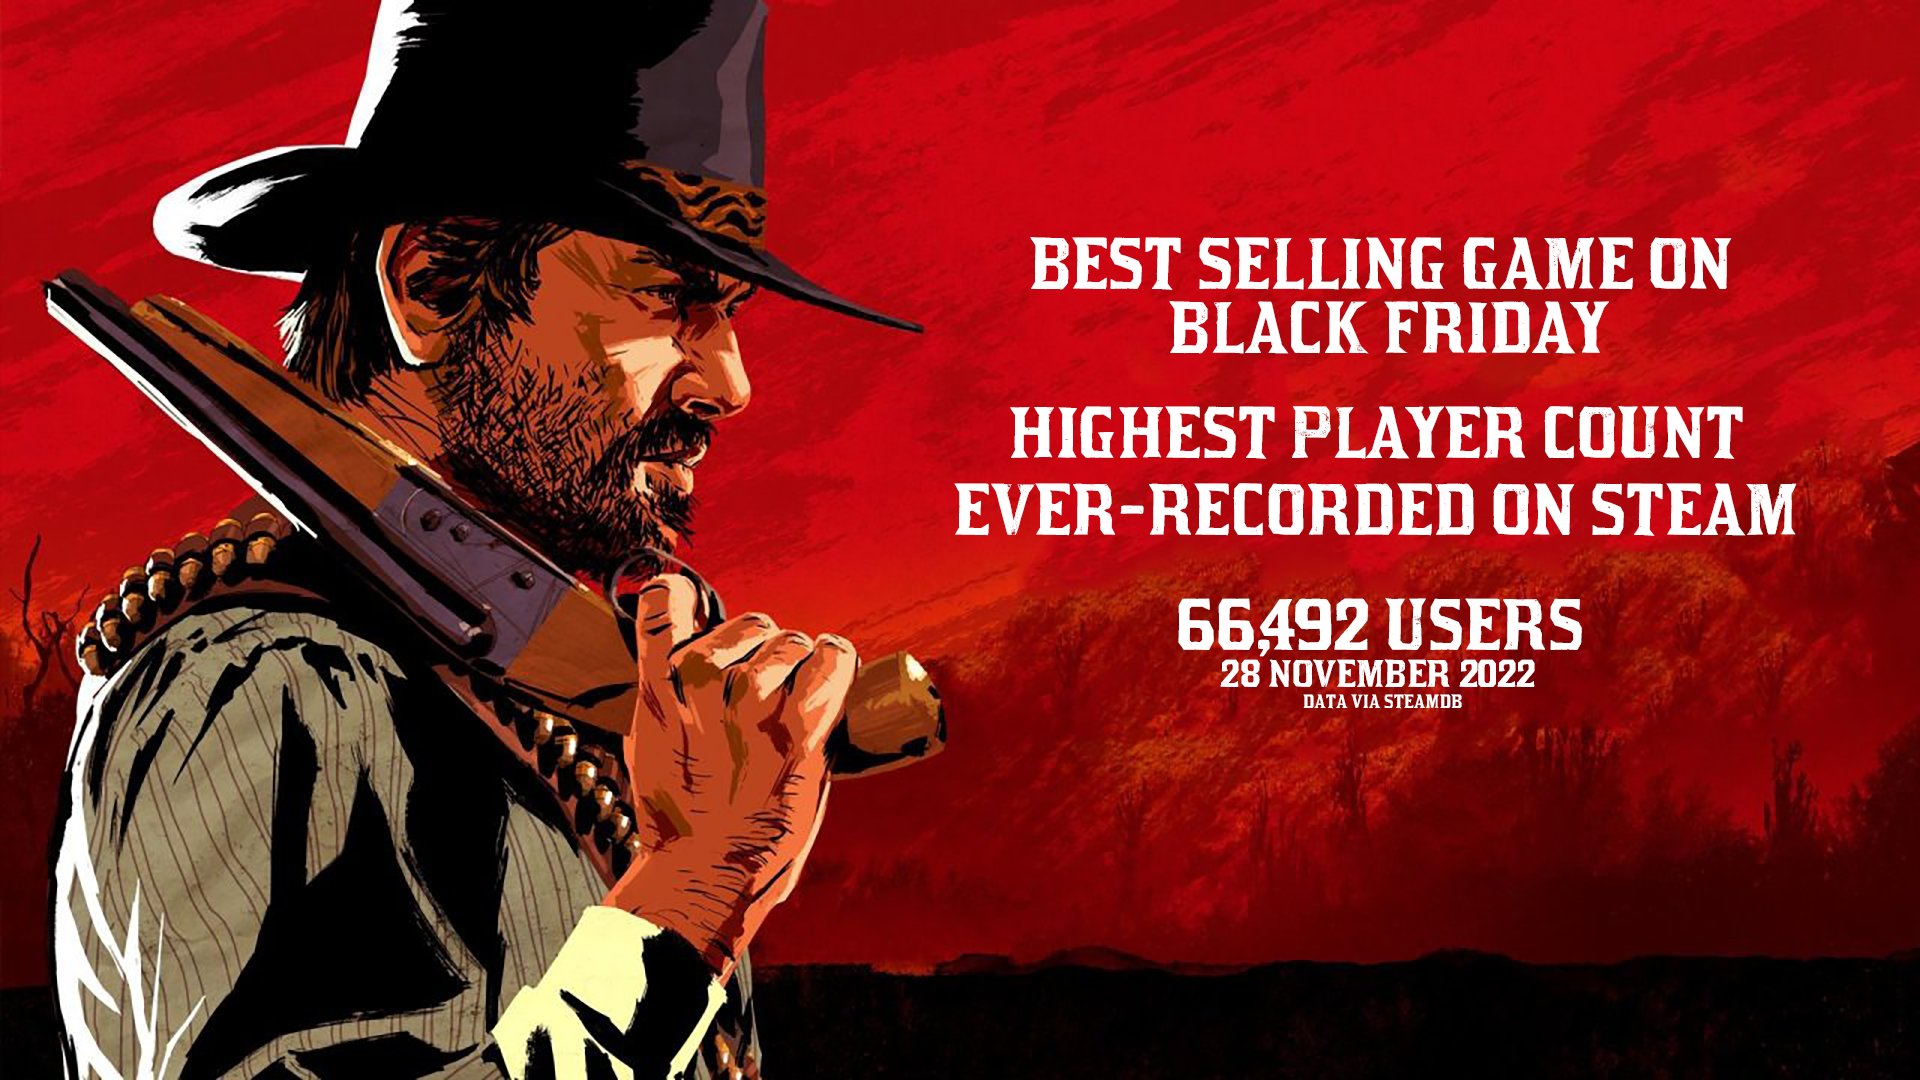 Ben on Twitter: "NEWS: Red Dead Redemption 2 had its highest player count ever on Steam and became one of the best-selling titles on Steam through the Steam Black Friday